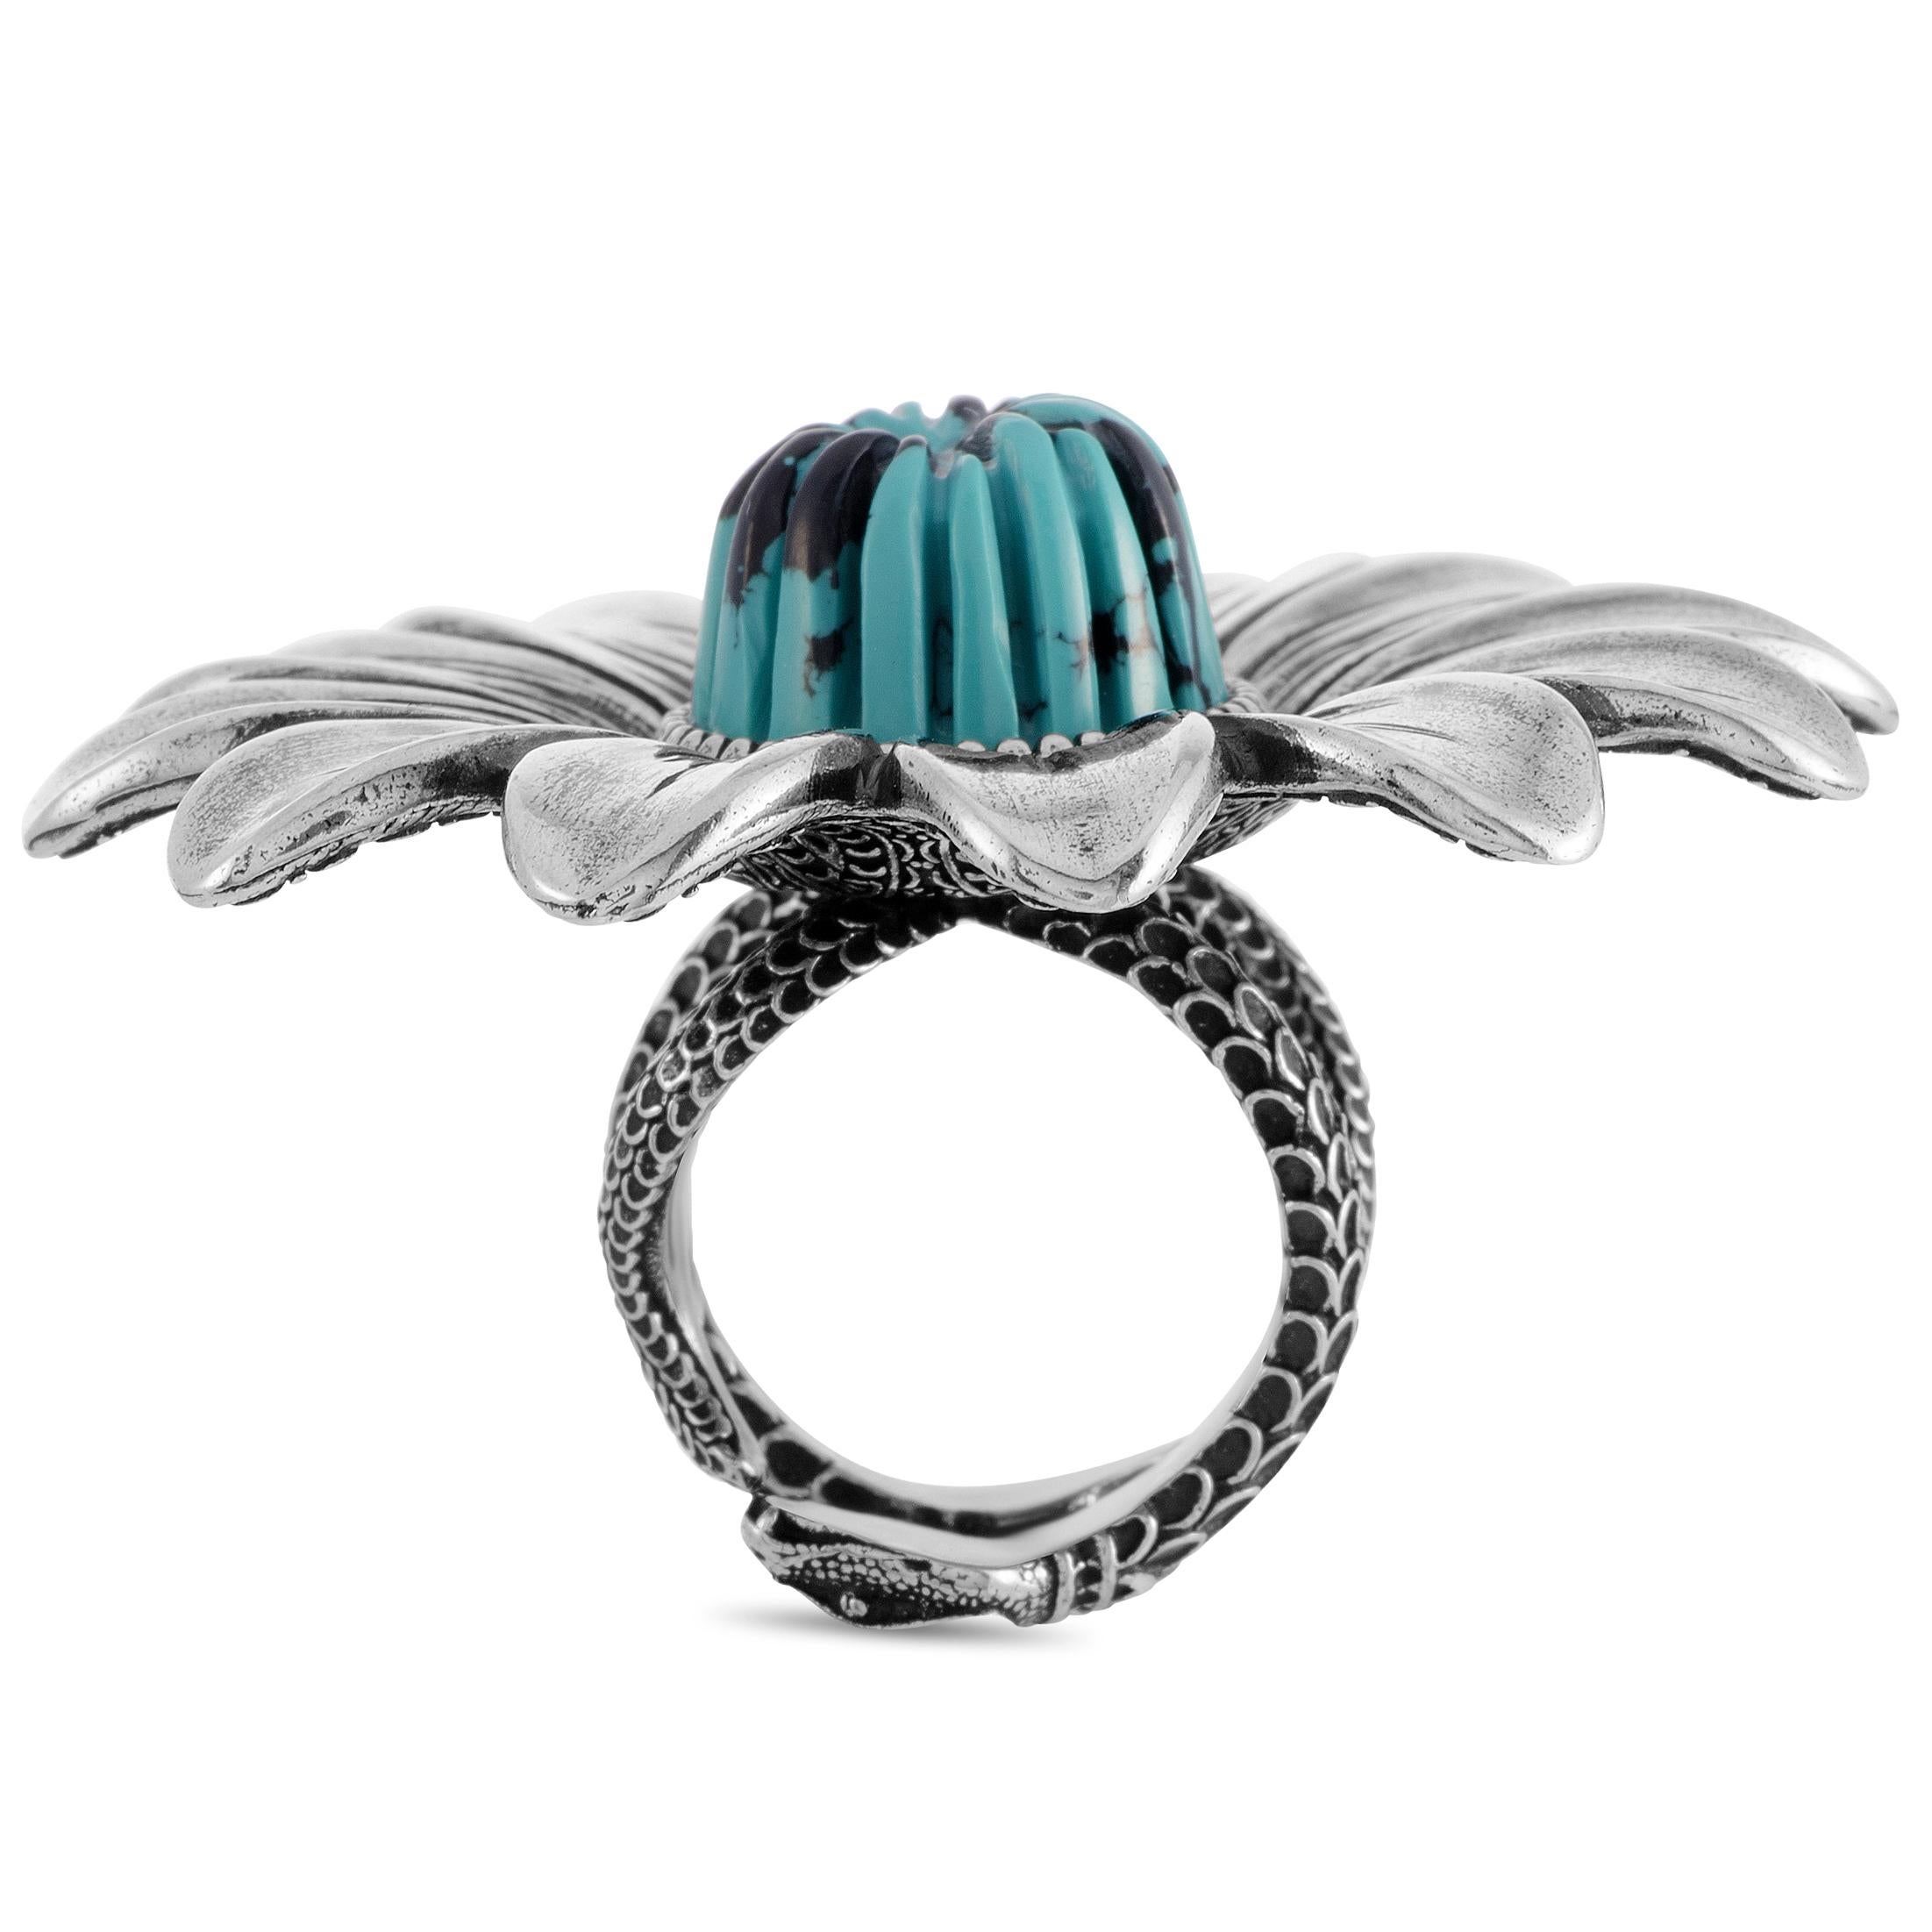 The Gucci “GG Marmont” ring is made out of silver and turquoise resin and weighs 41.2 grams. The ring boasts band thickness of 15 mm and top height of 15 mm, while top dimensions measure 50 by 50 mm.
 
 This jewelry piece is offered in brand new